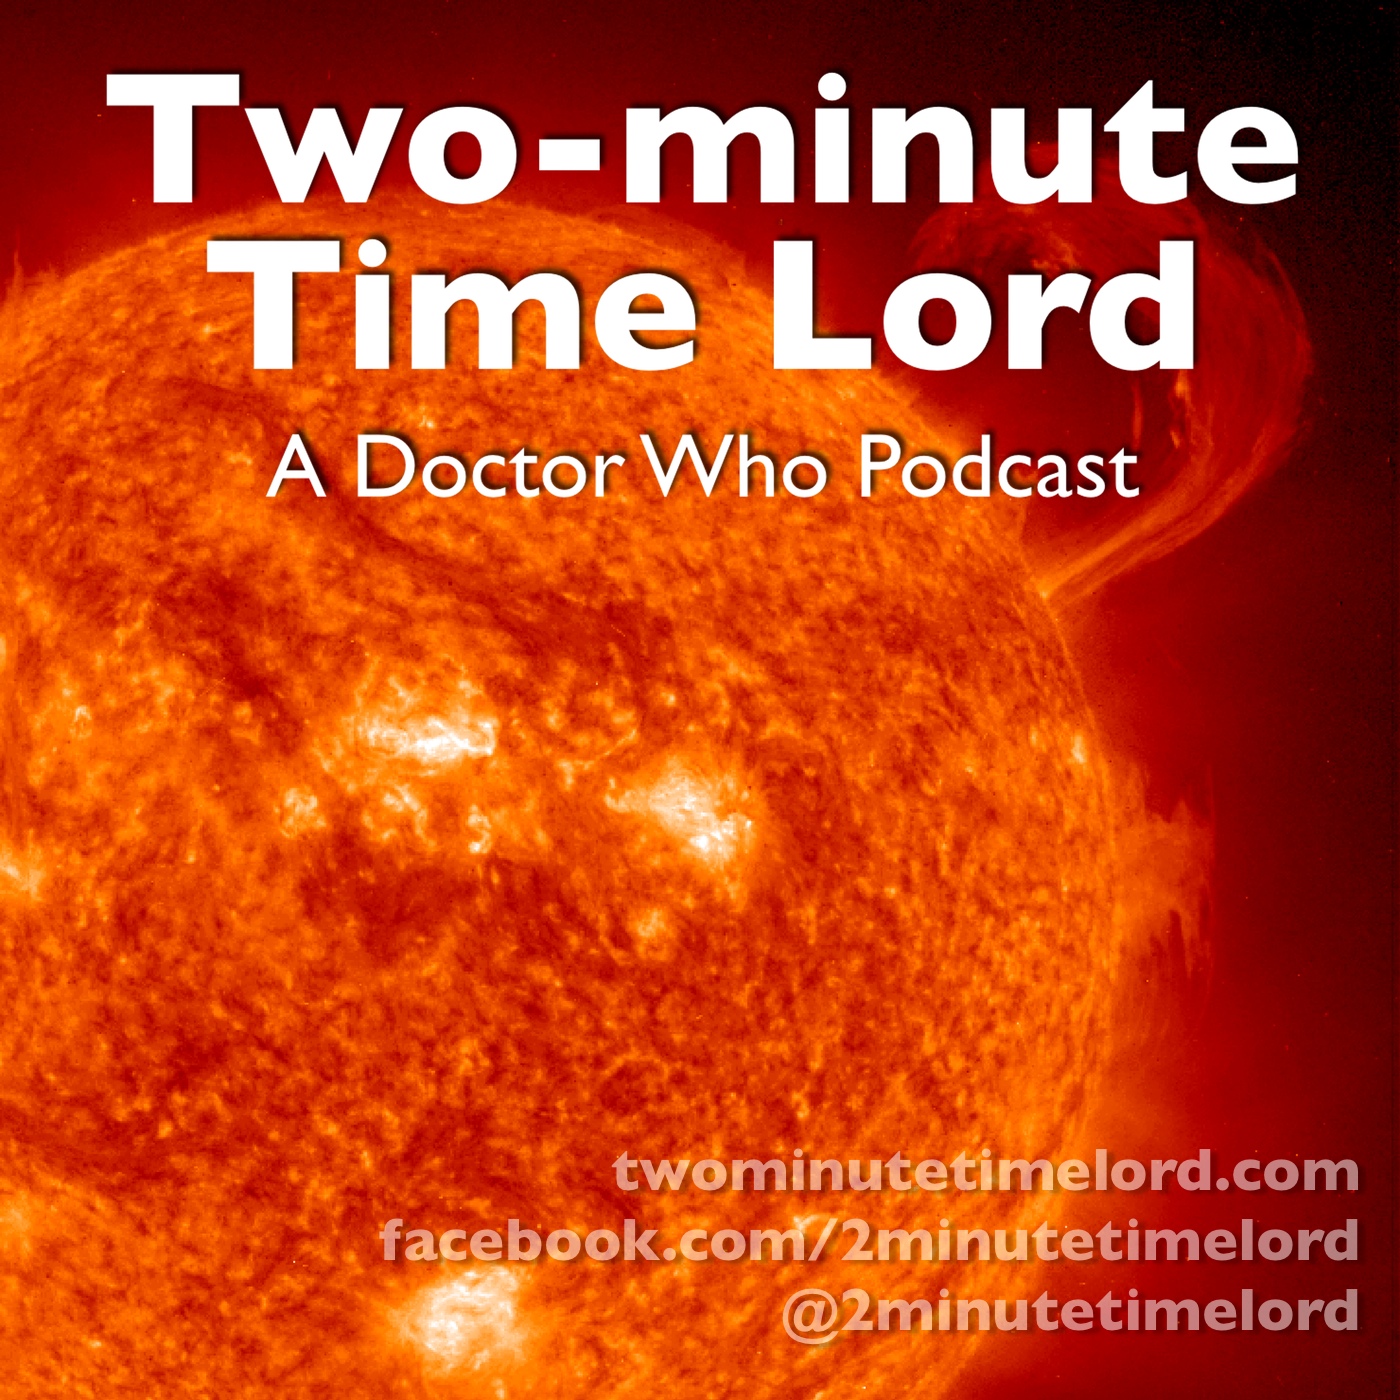 Two-minute Time Lord Podcast artwork